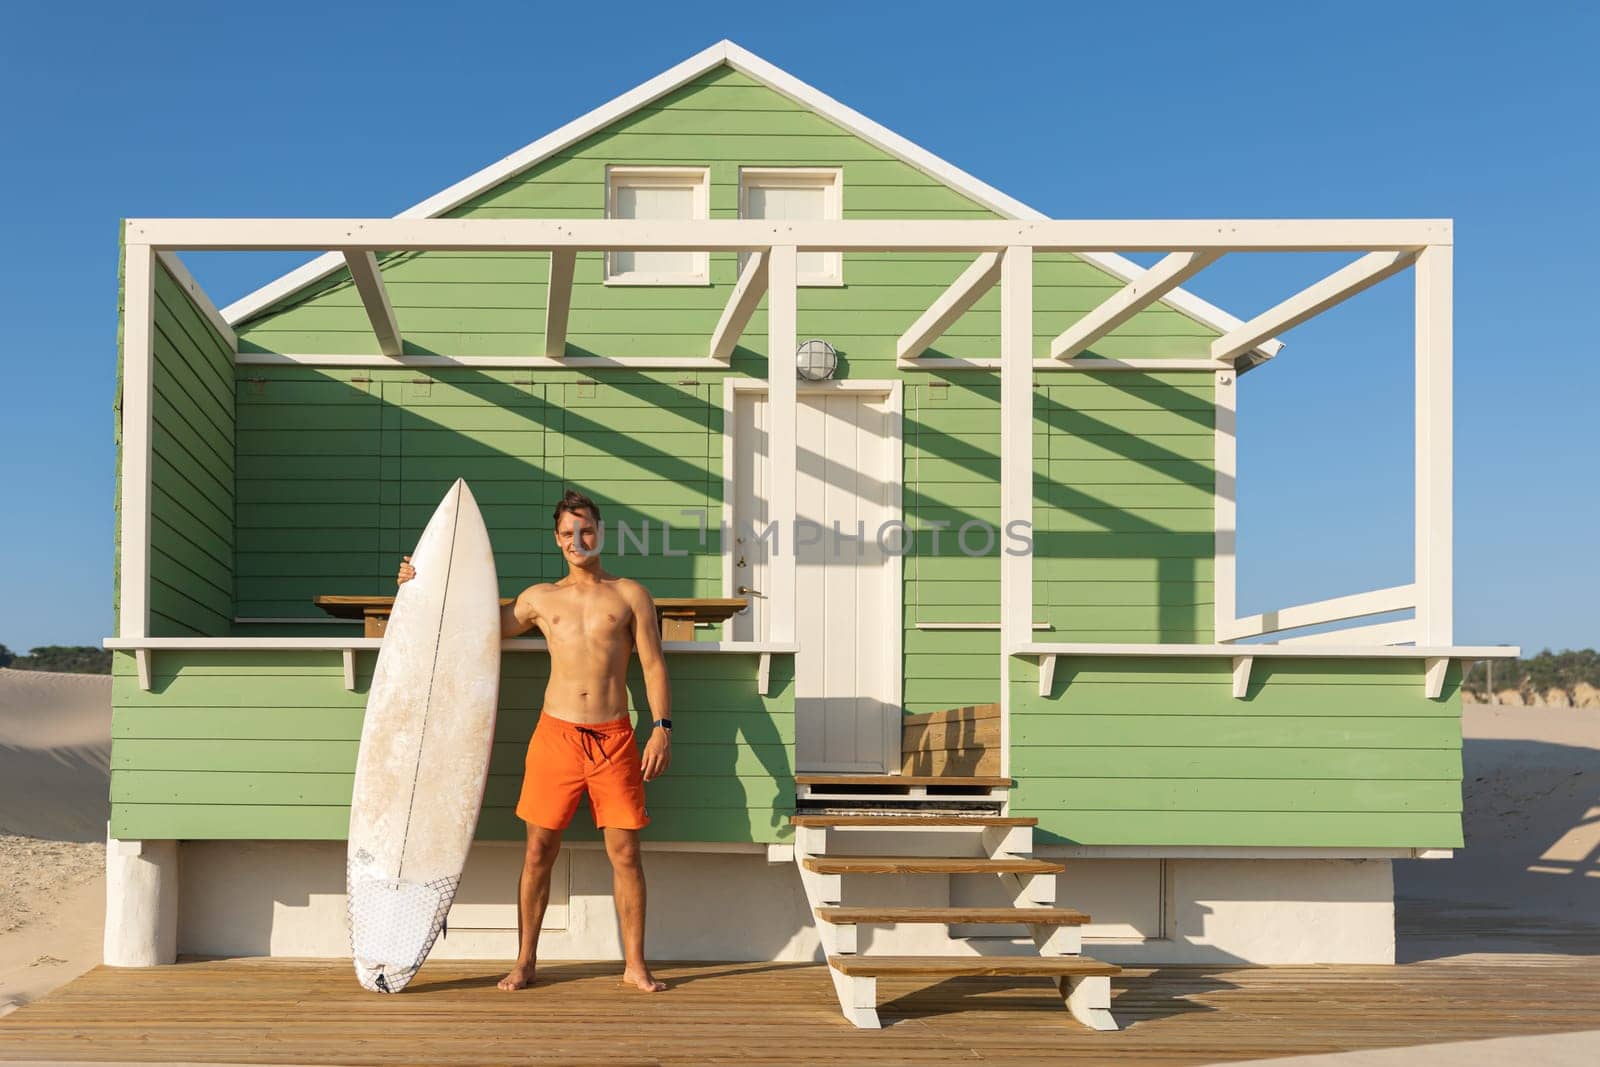 A smiling man surfer standing at a shore house on the beach holding his surfing board. Mid shot